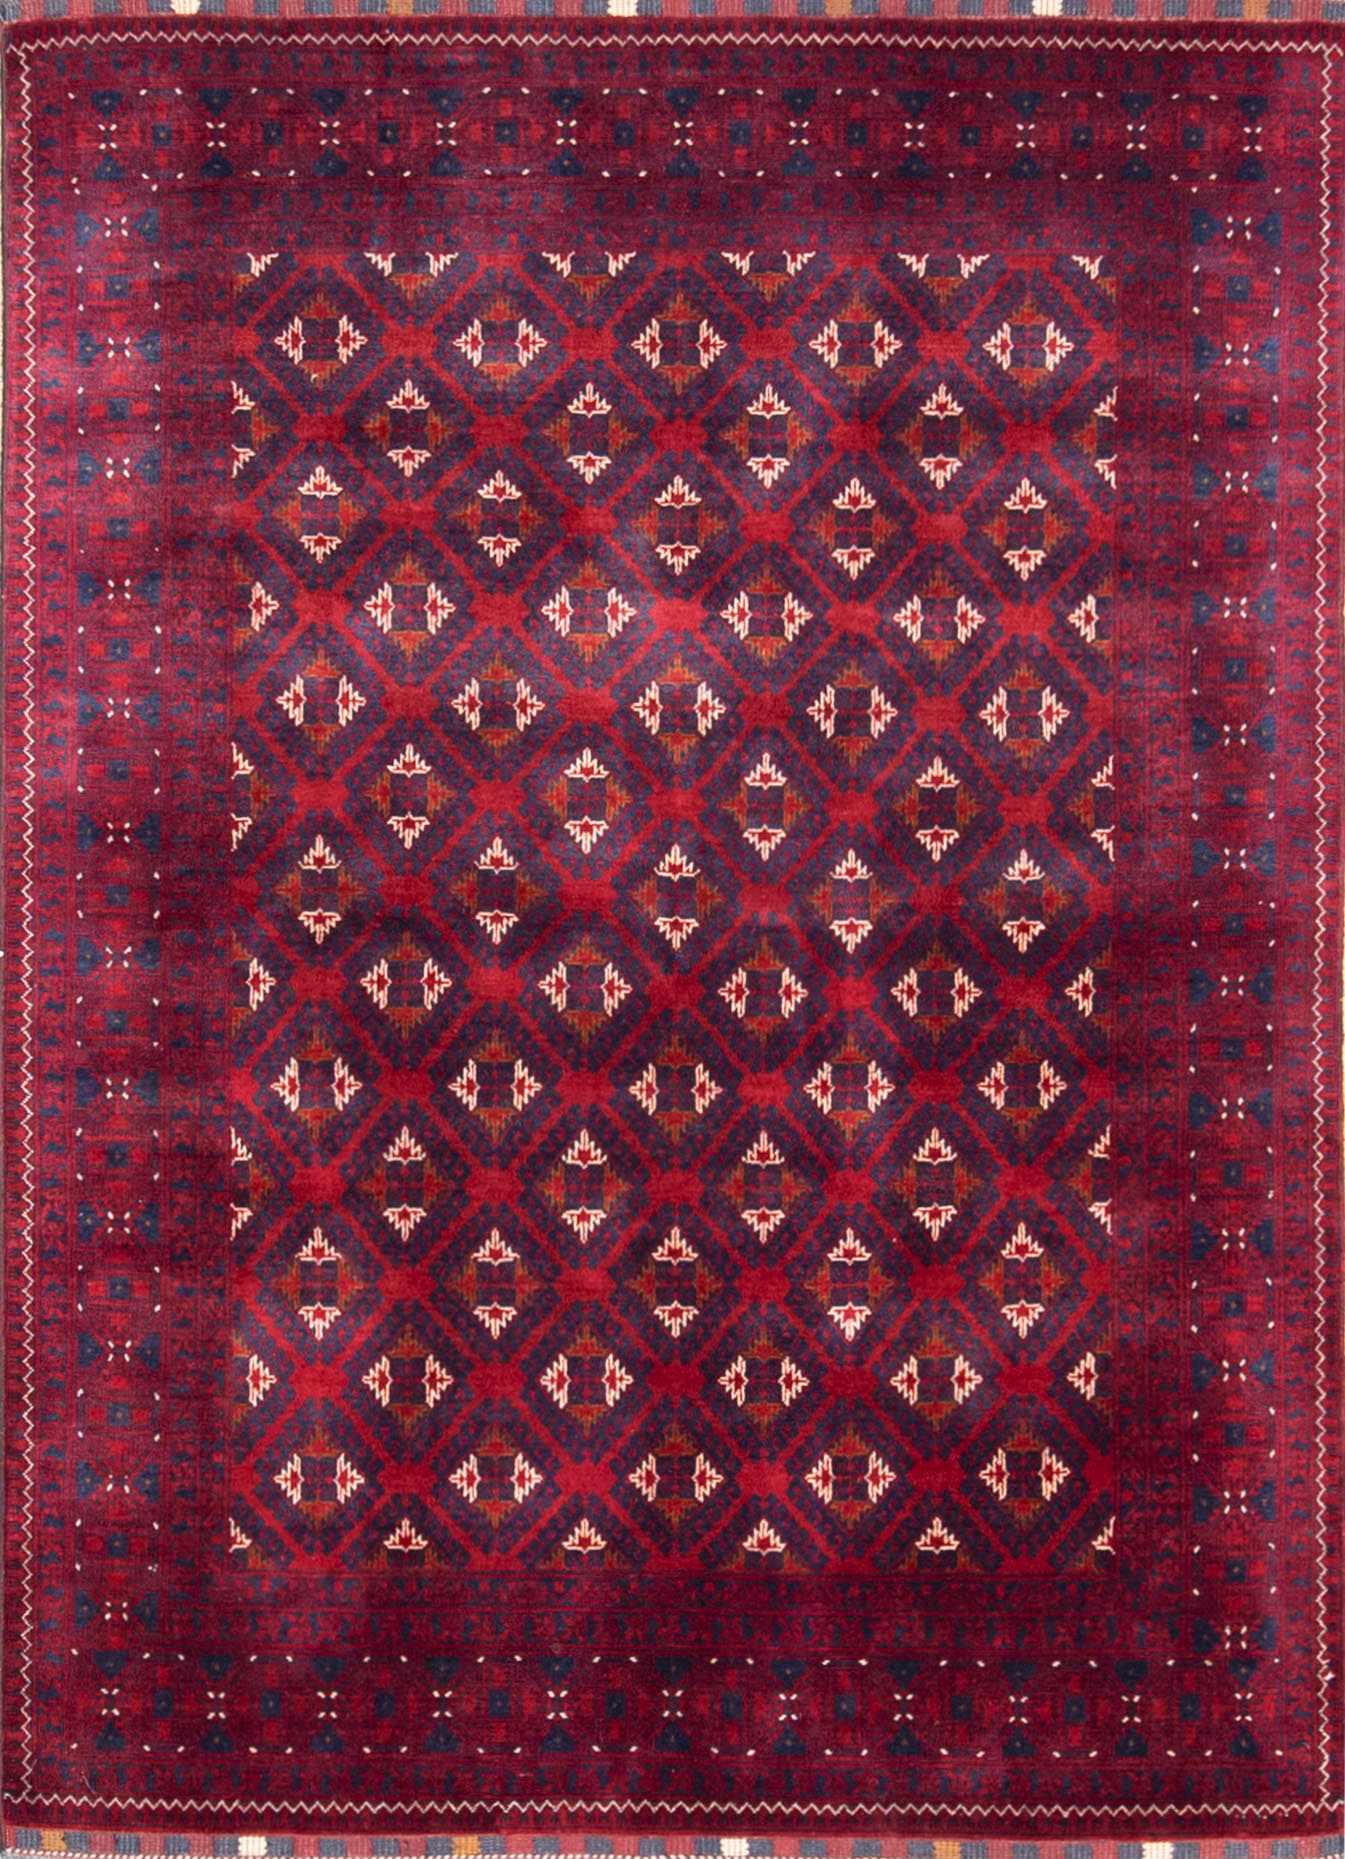 Hand knotted tribal Afghan Turkmen rug in red and navy-blue colors. Rug size 4.10x6.7.